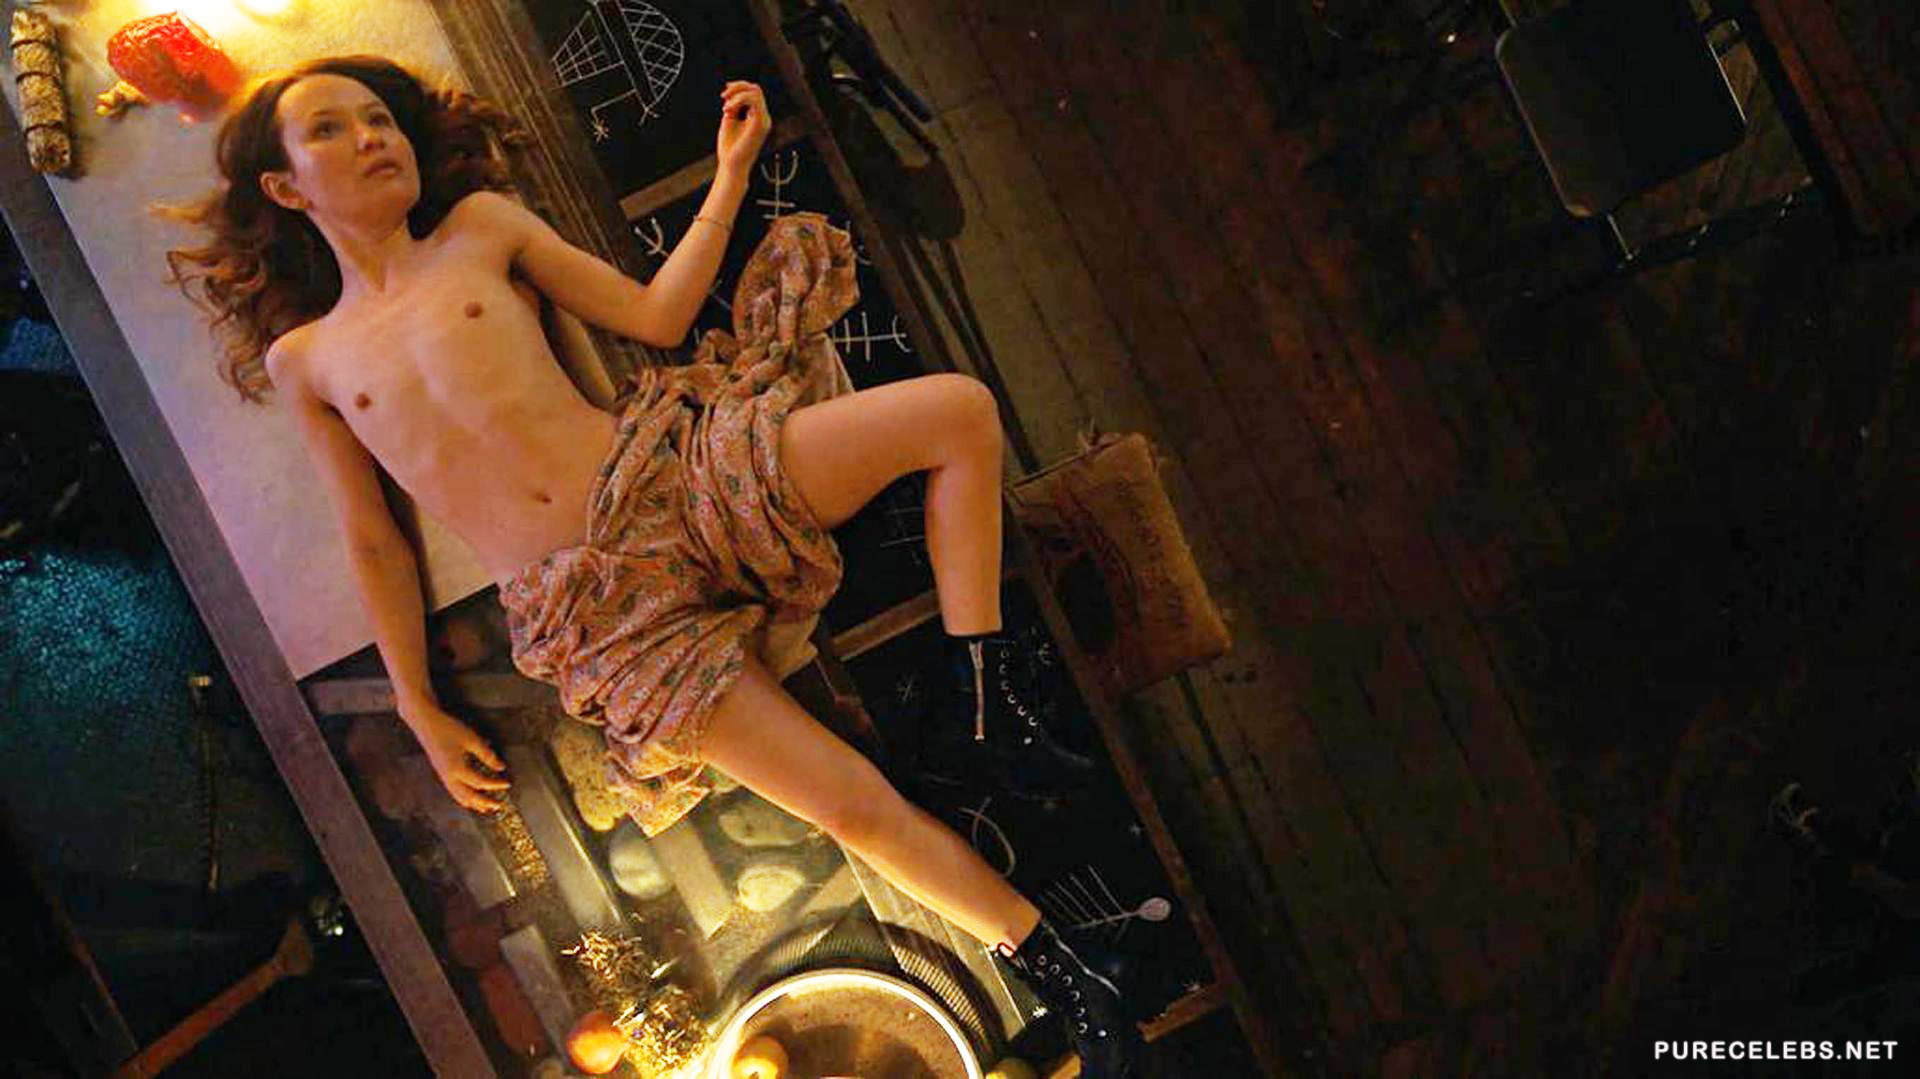 Browning pictures emily nude Emily Browning